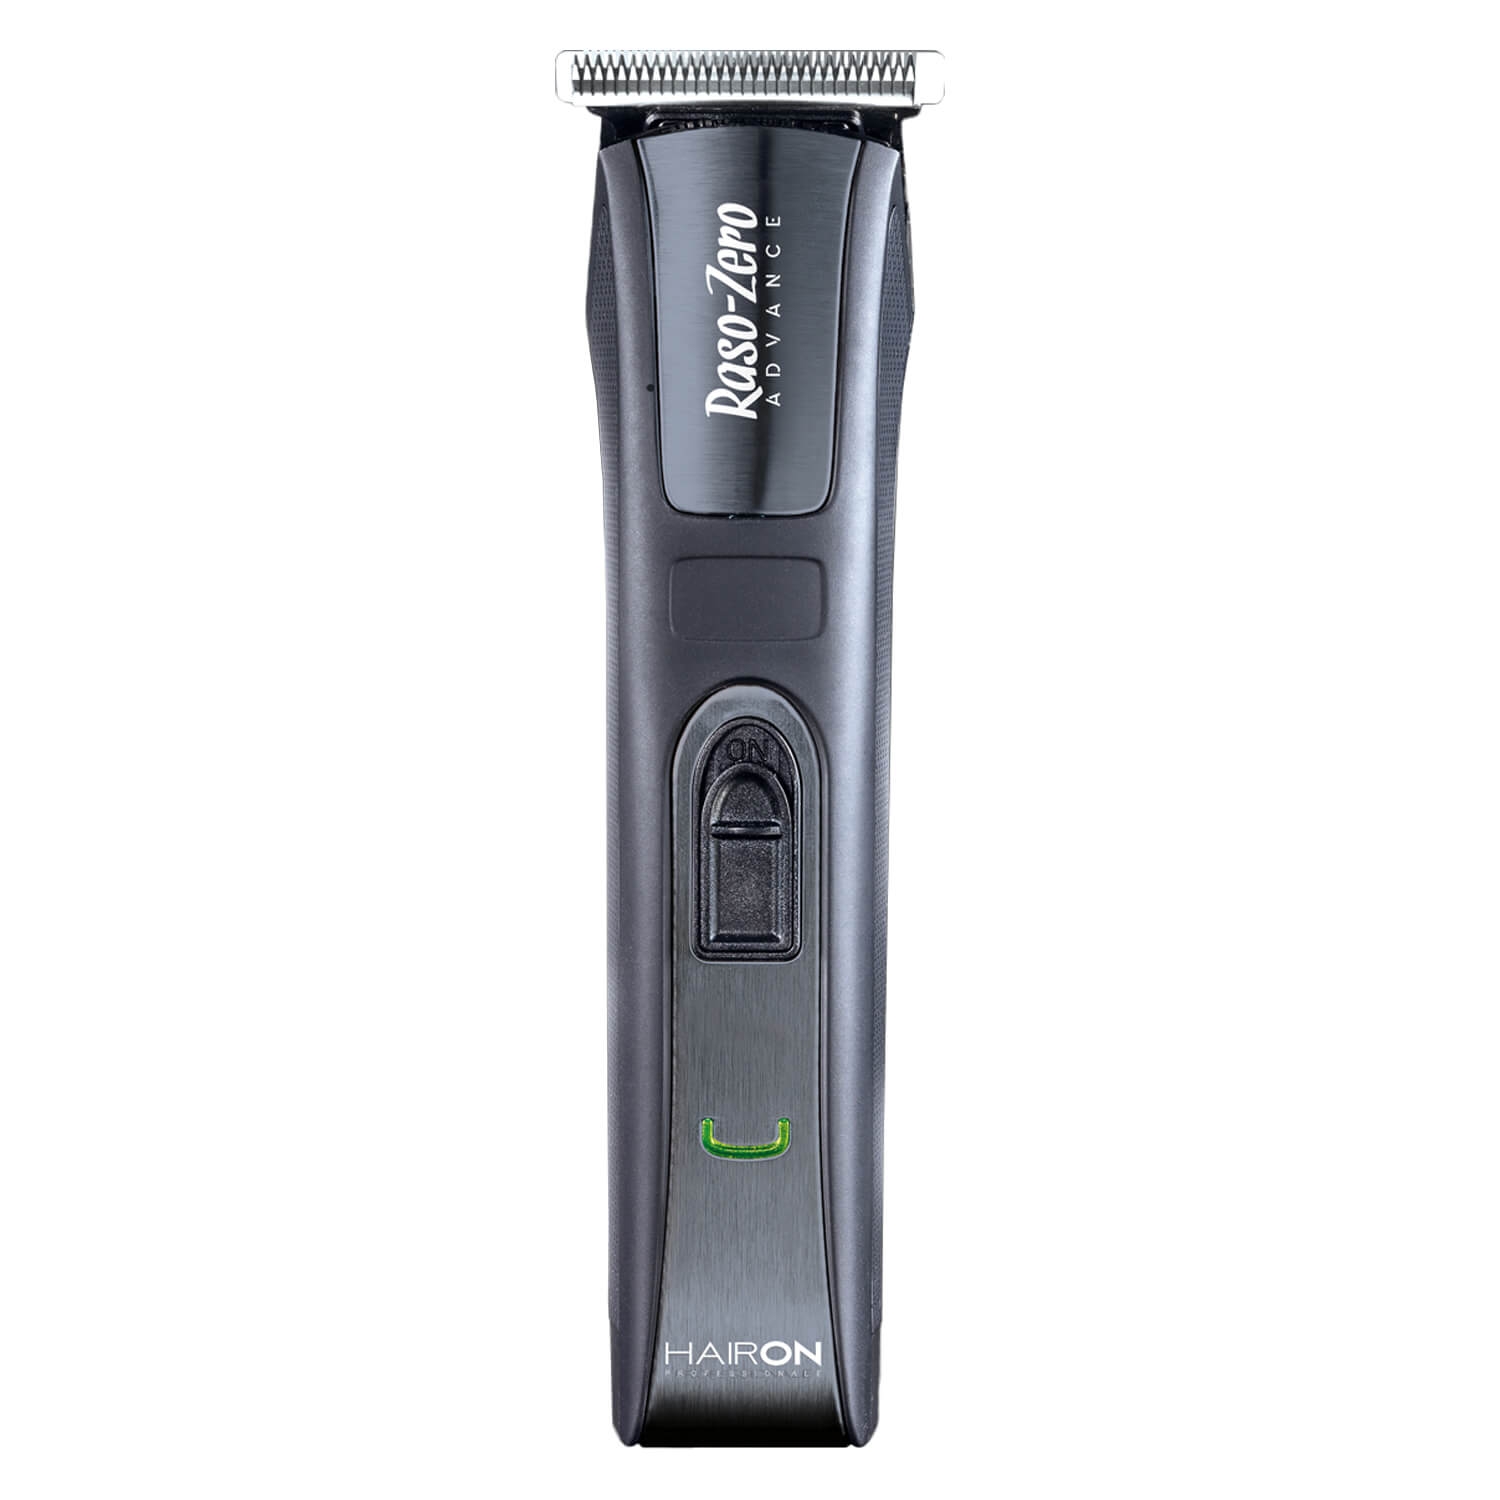 Product image from HAIRON - Raso Zero Advance Hair Clipper